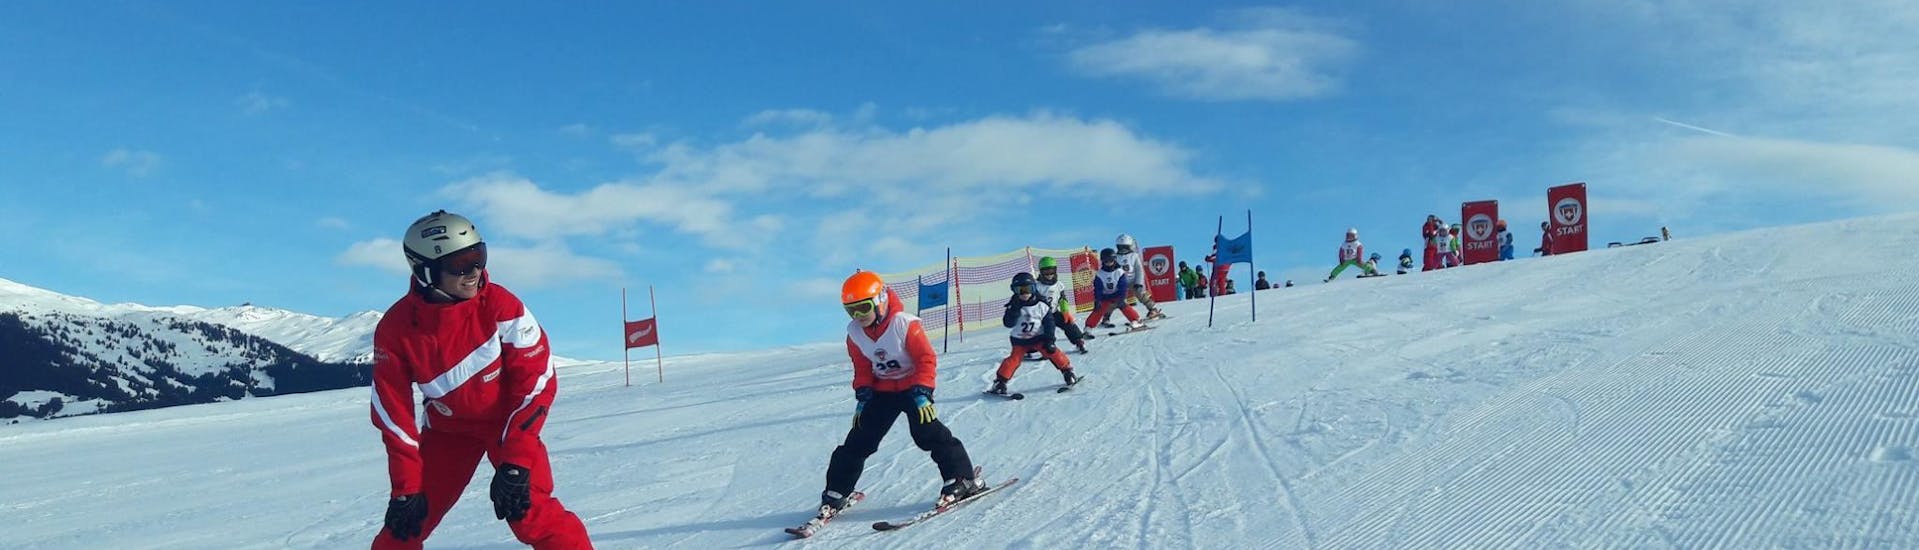 Ski Lessons for Kids (from 4 years) - Half Day - All Levels.